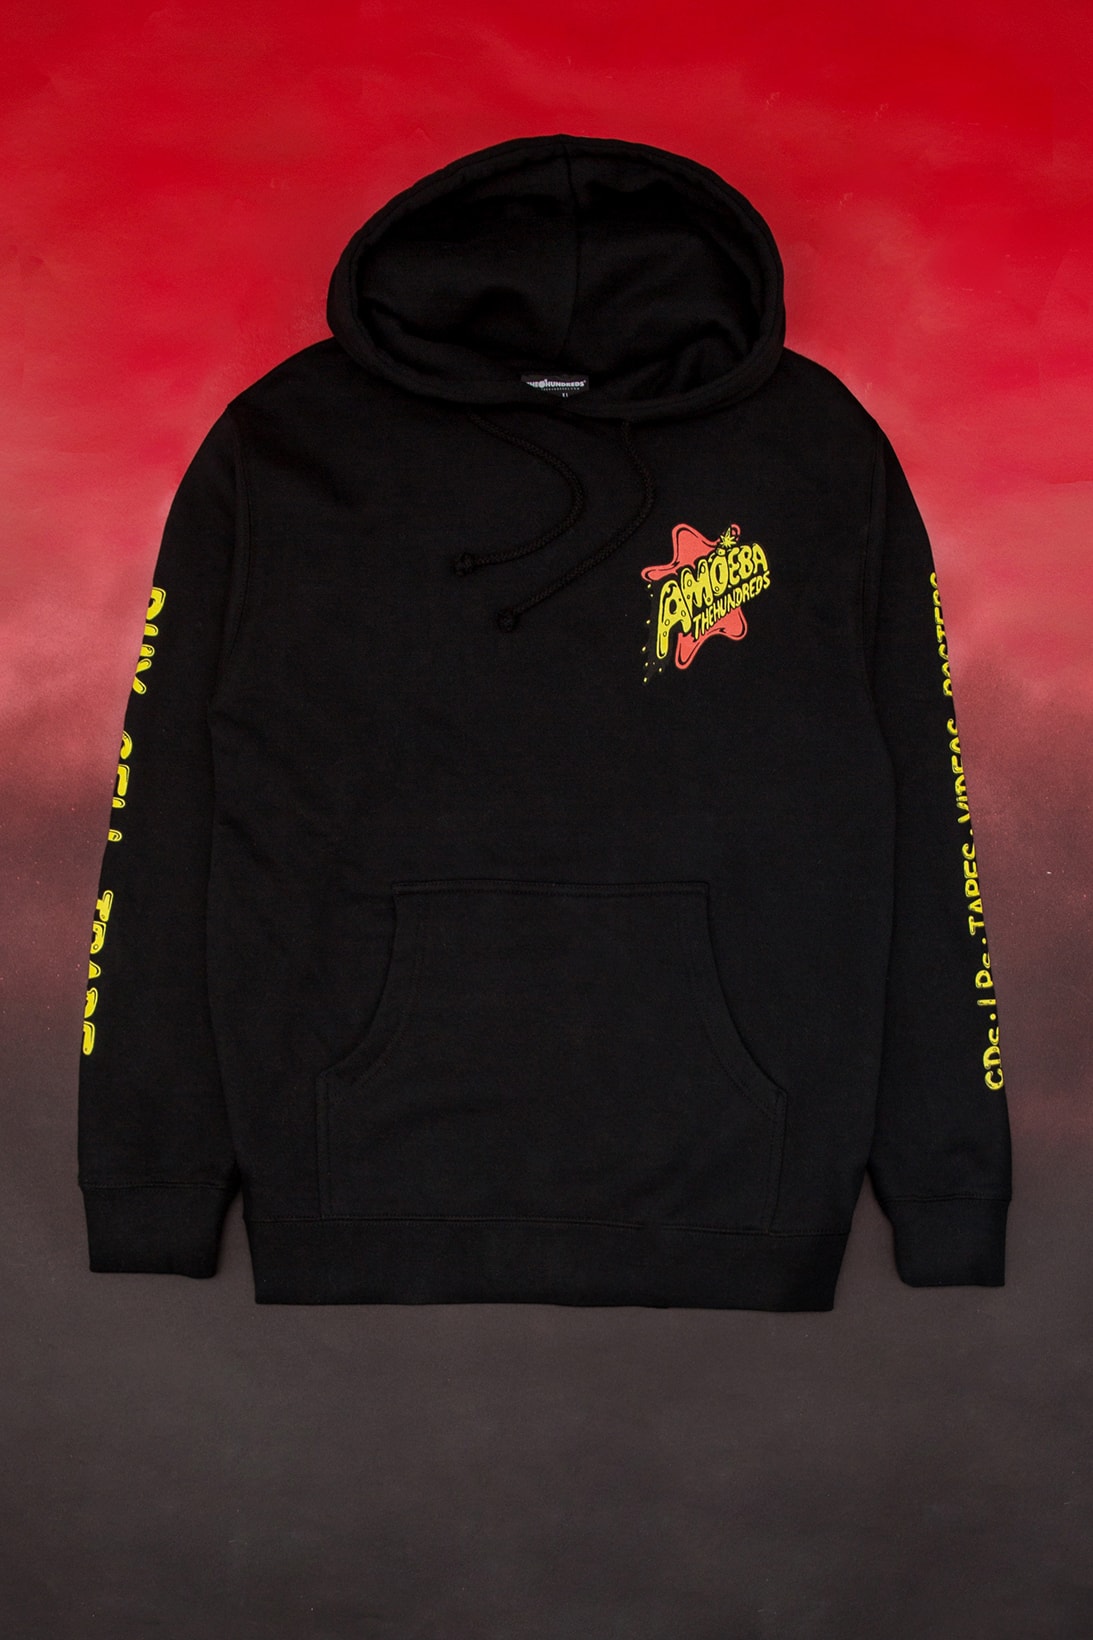 The Hundreds x Amoeba Music Collaboration release date info drop